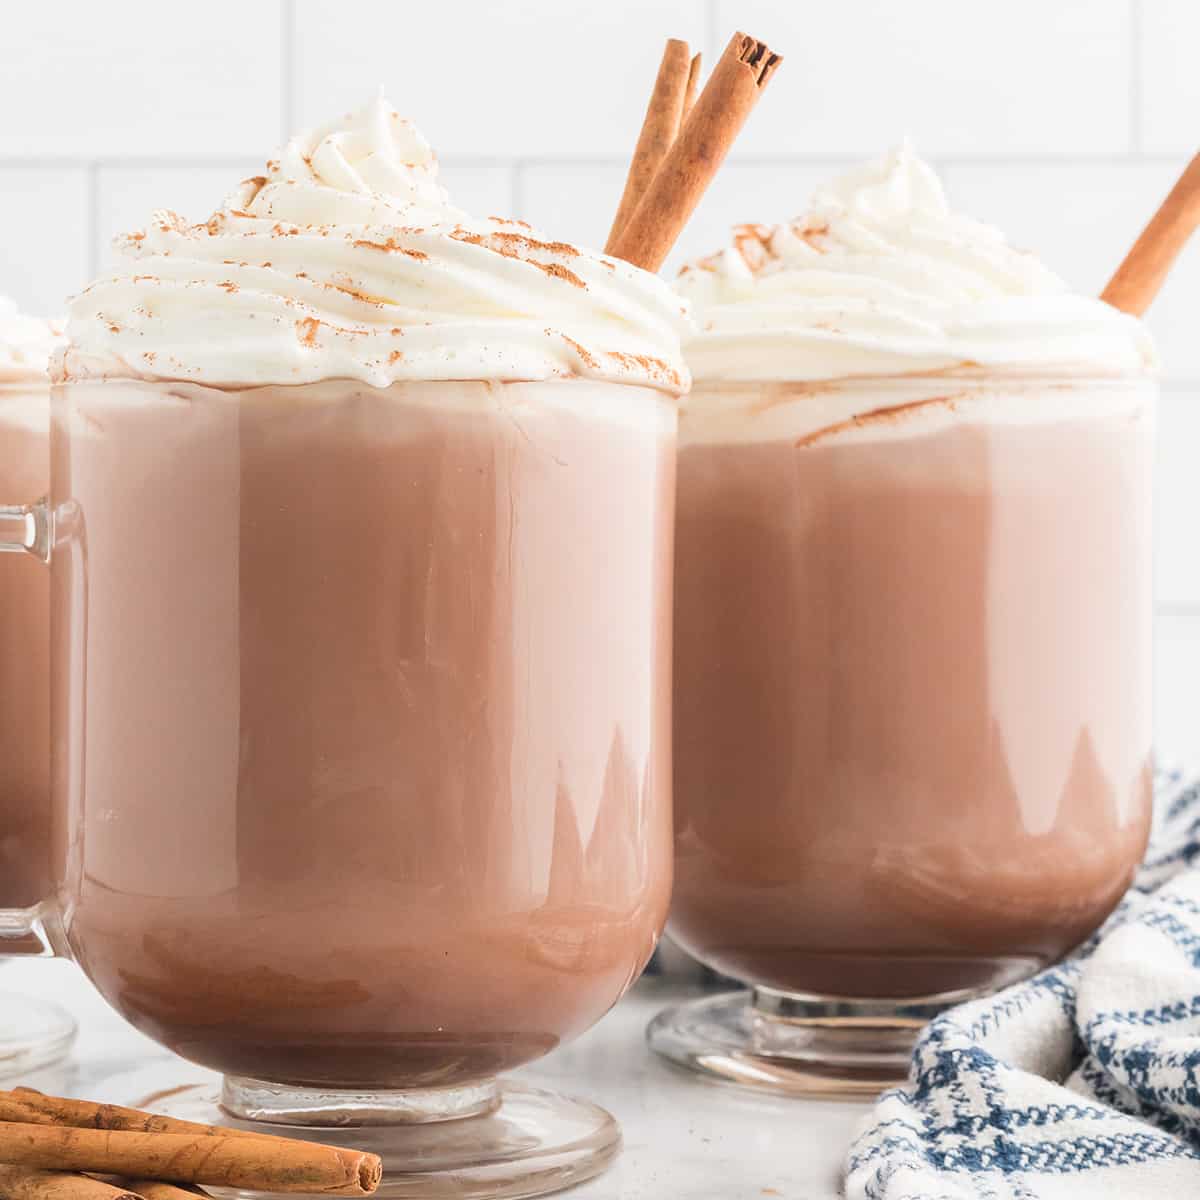 Three cups of hot chocolate with whipped cream and cinnamon on top.